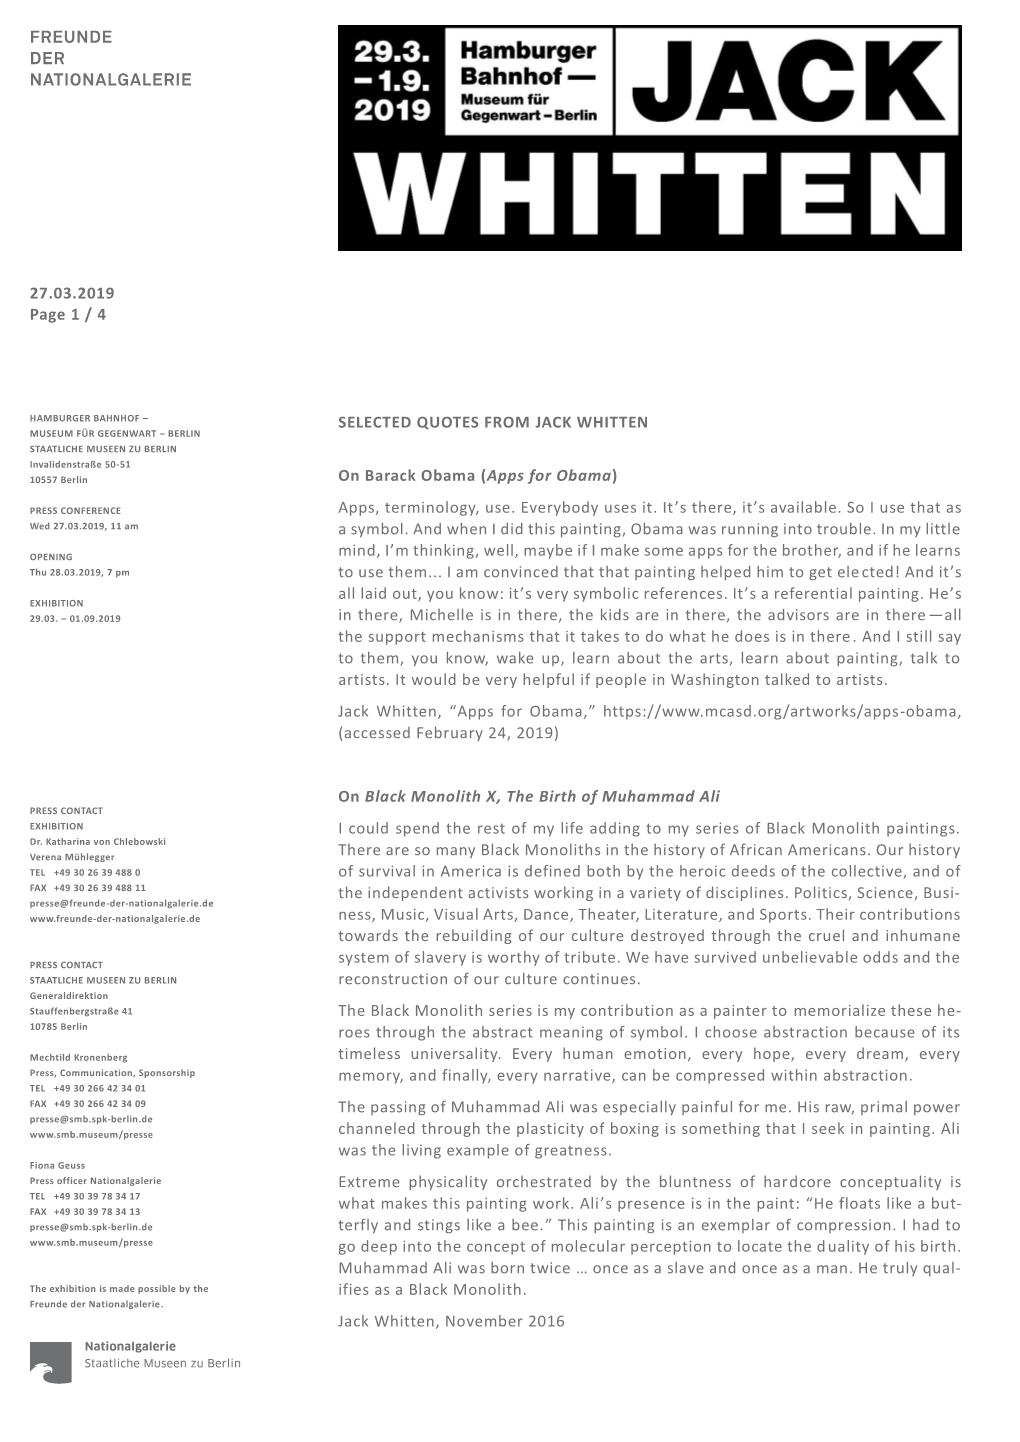 Page 1 / 4 SELECTED QUOTES from JACK WHITTEN on Barack Obama